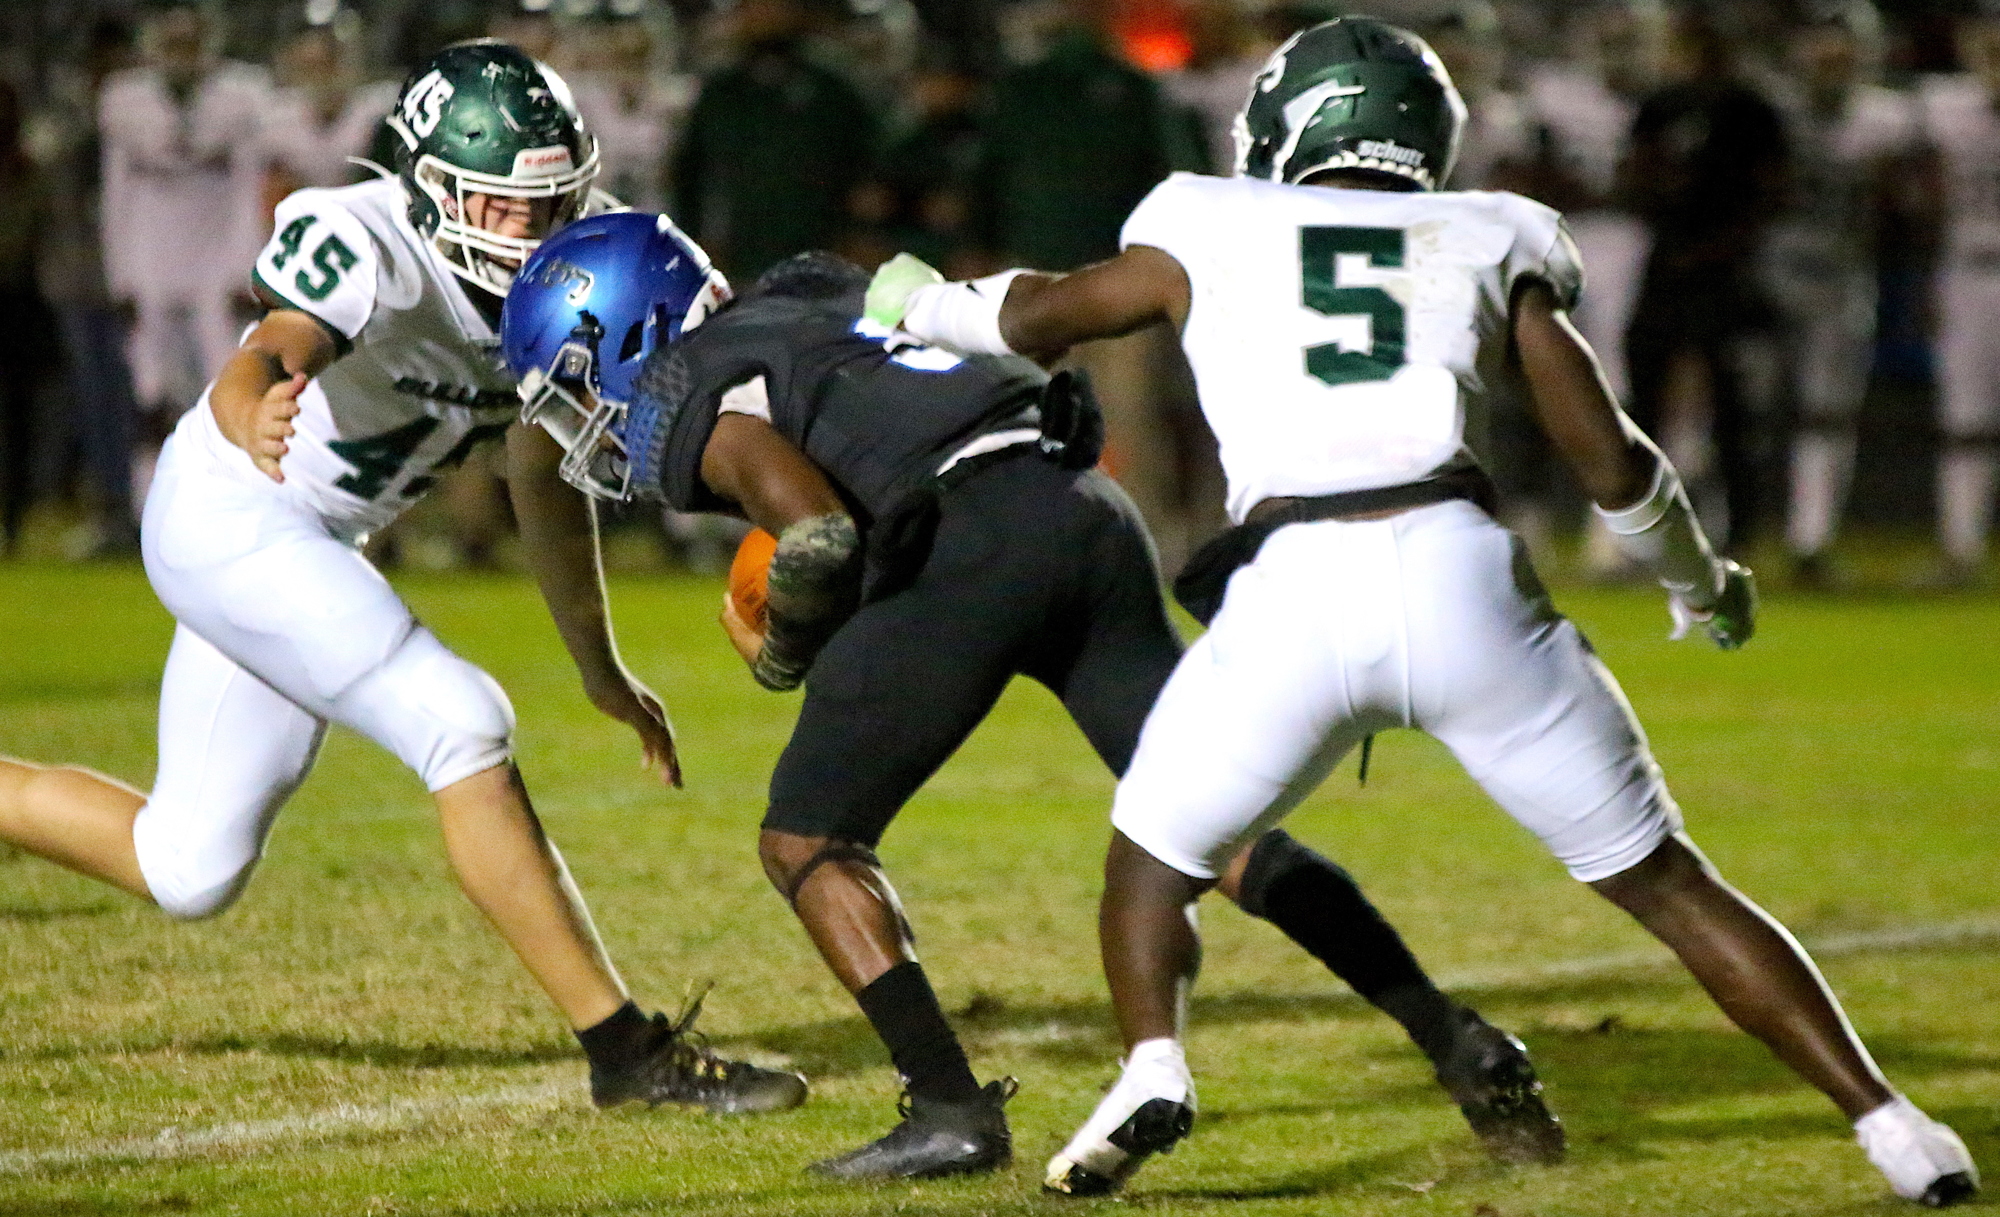 FPC defensive end Colby Cronk and linebacker R.J. Hill converge on Matanzas quarterback Dakwon Evans. Photo by Brent Woronoff